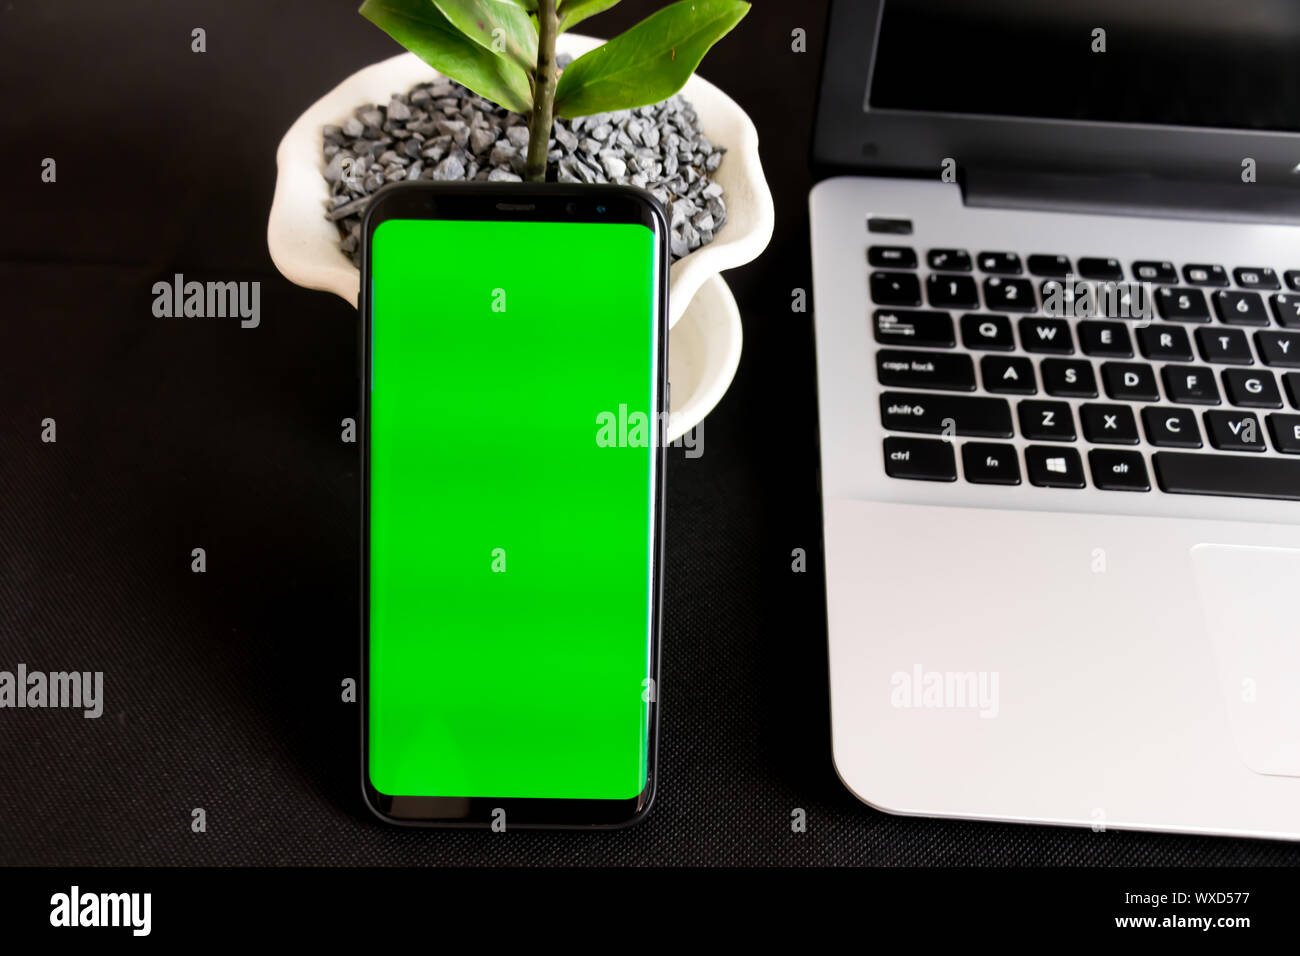 Black office desk with smartphone in green screen, office plant Stock Photo